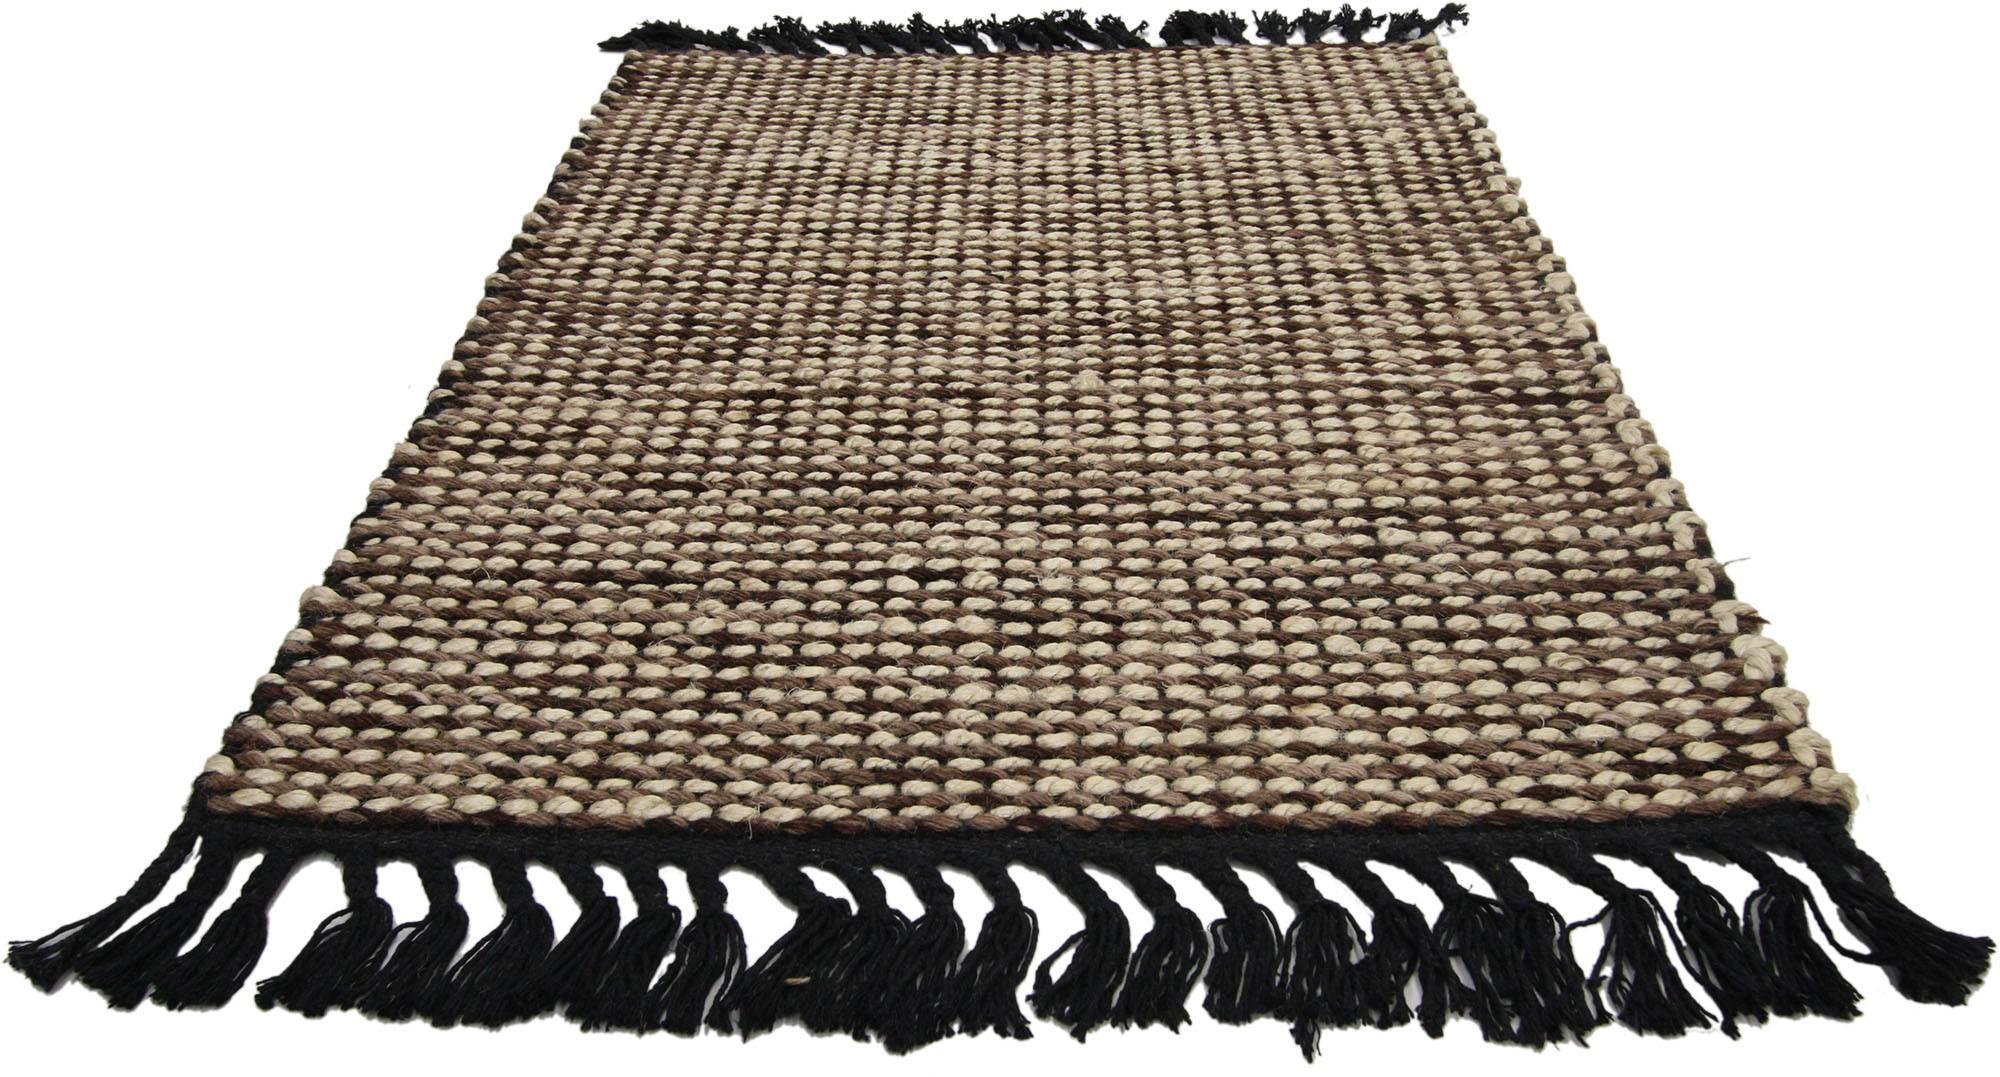 30383, new Dhurrie flat-weave Kilim rug with Modern Lake House style, Custom Area rug. Freshen up your space and inject color without going polychrome crazy with this transitional grasscloth pattern area rug. Subtle in style and very versatile, this